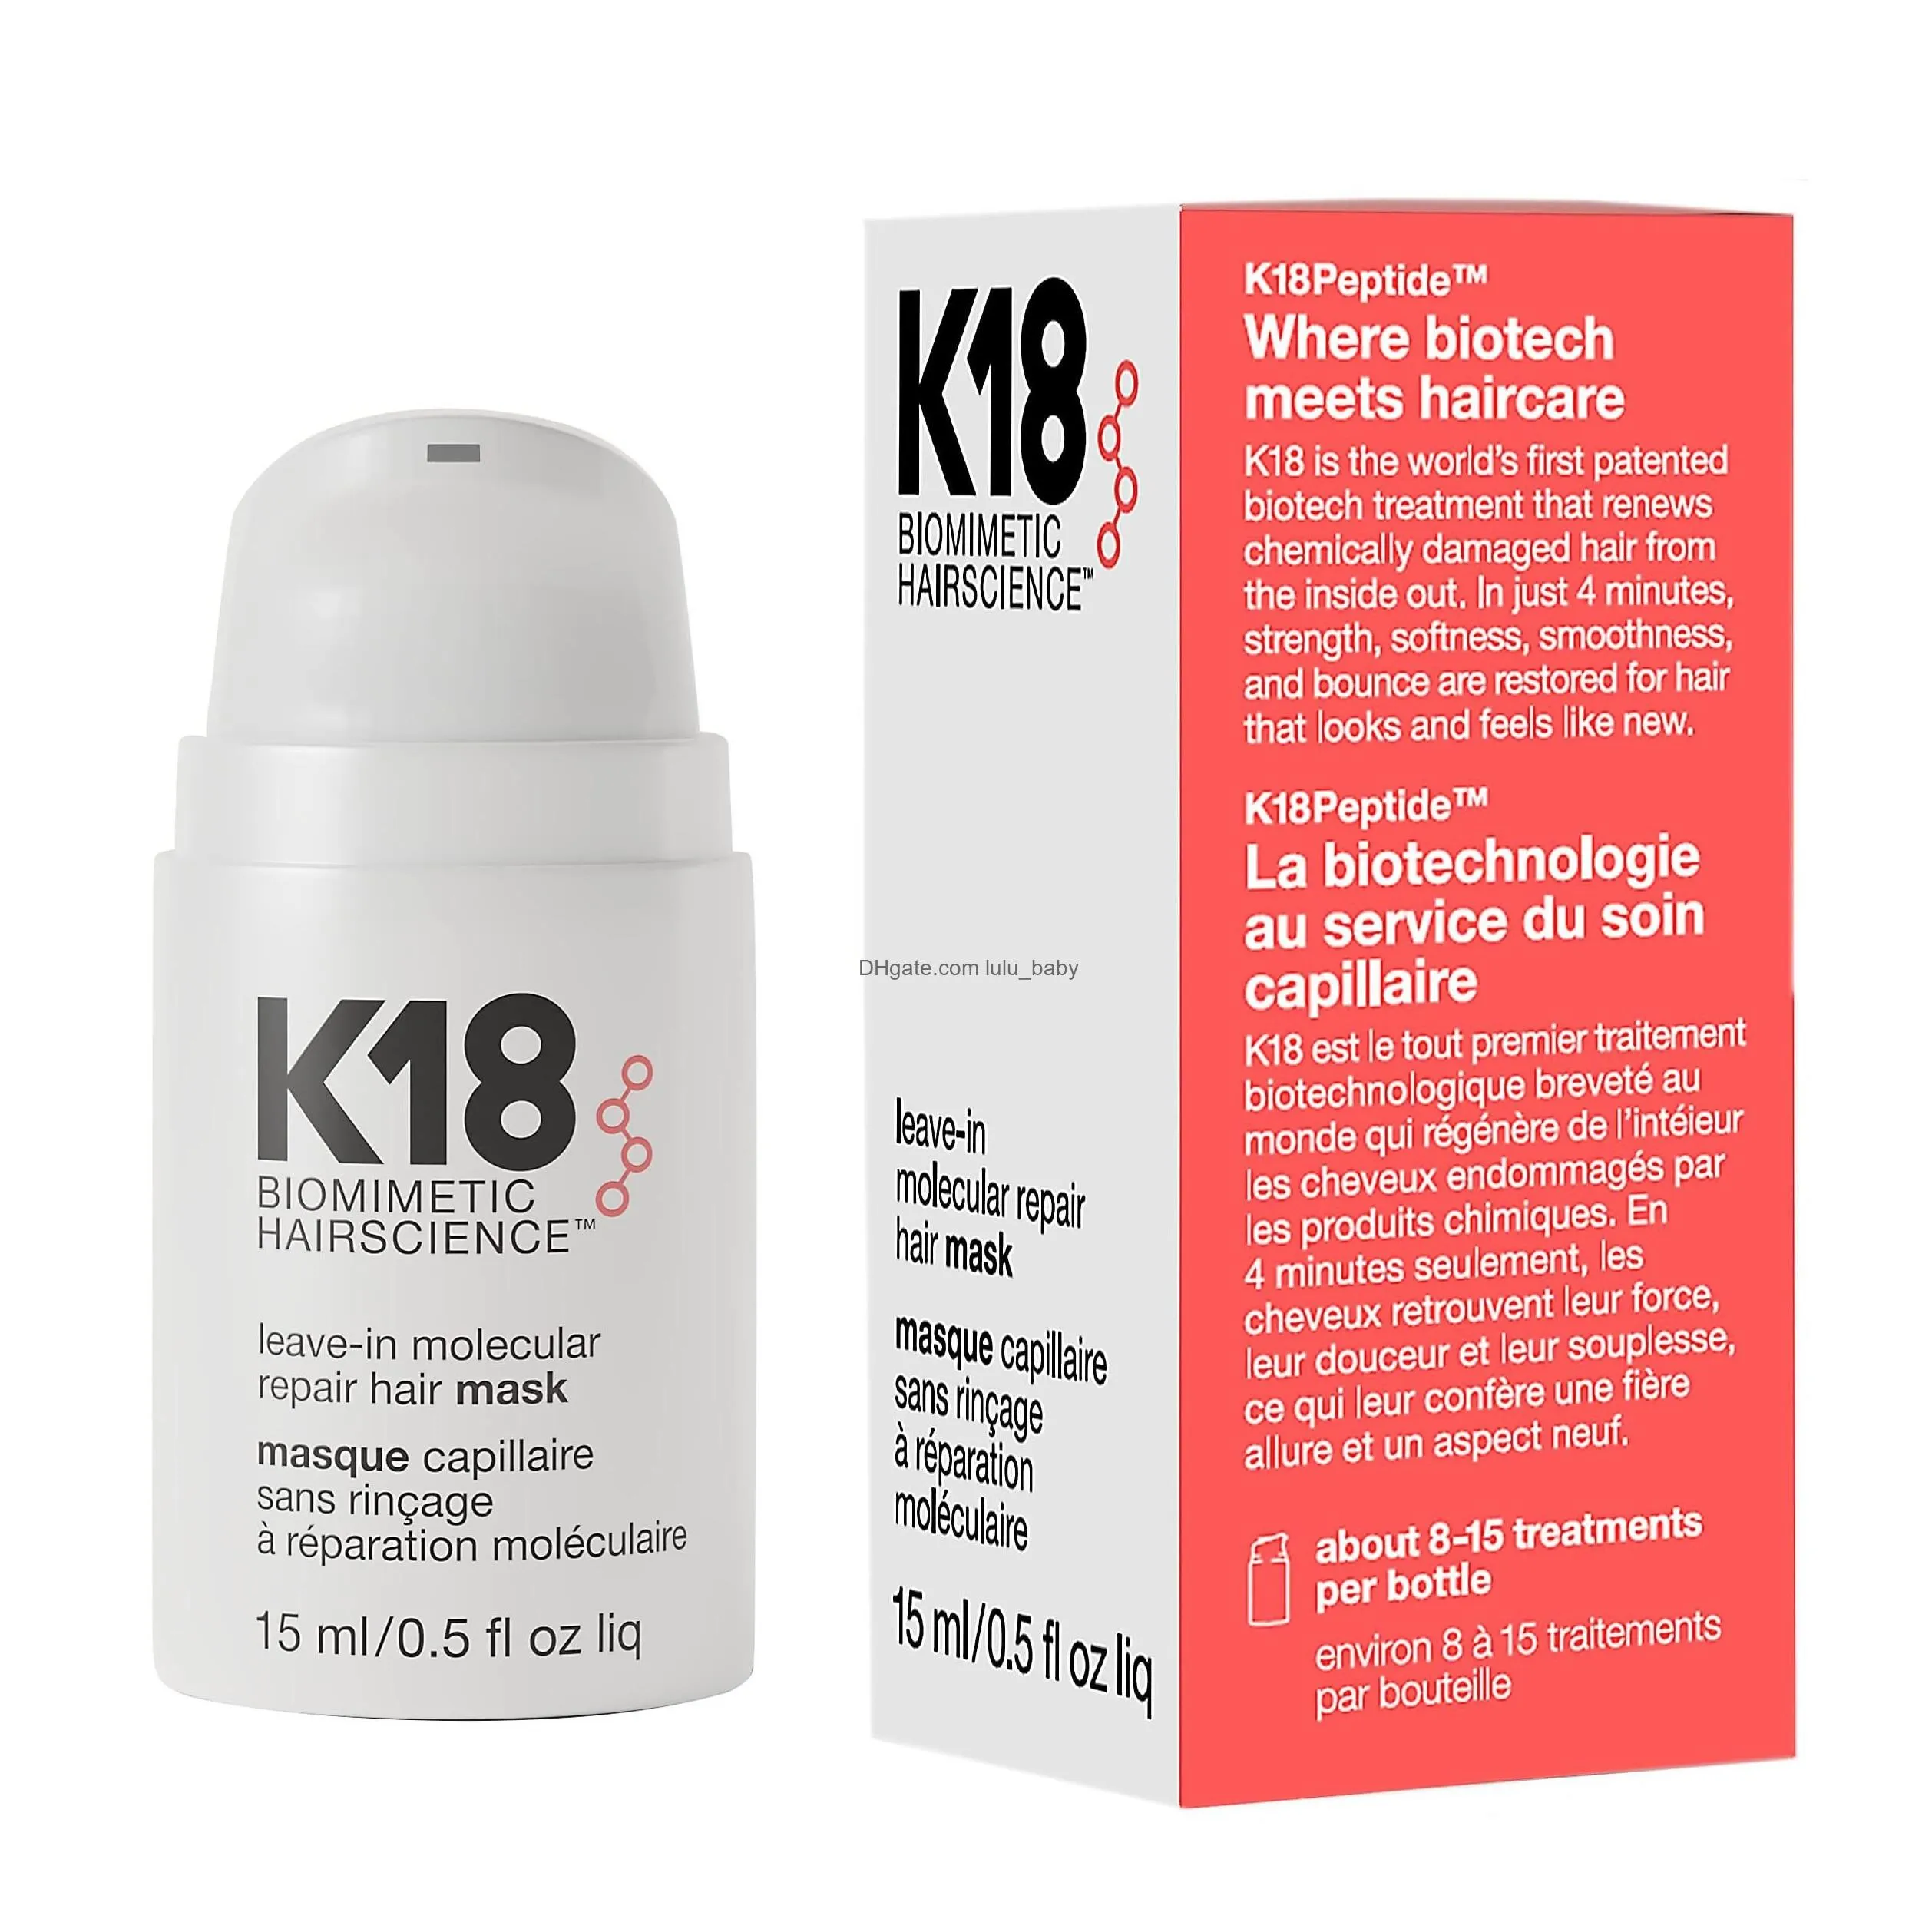 shampoo conditioner k18 leavein molecar repair hair mask treatment to damaged 4 minutes reverse damage from bleach color chemical dr